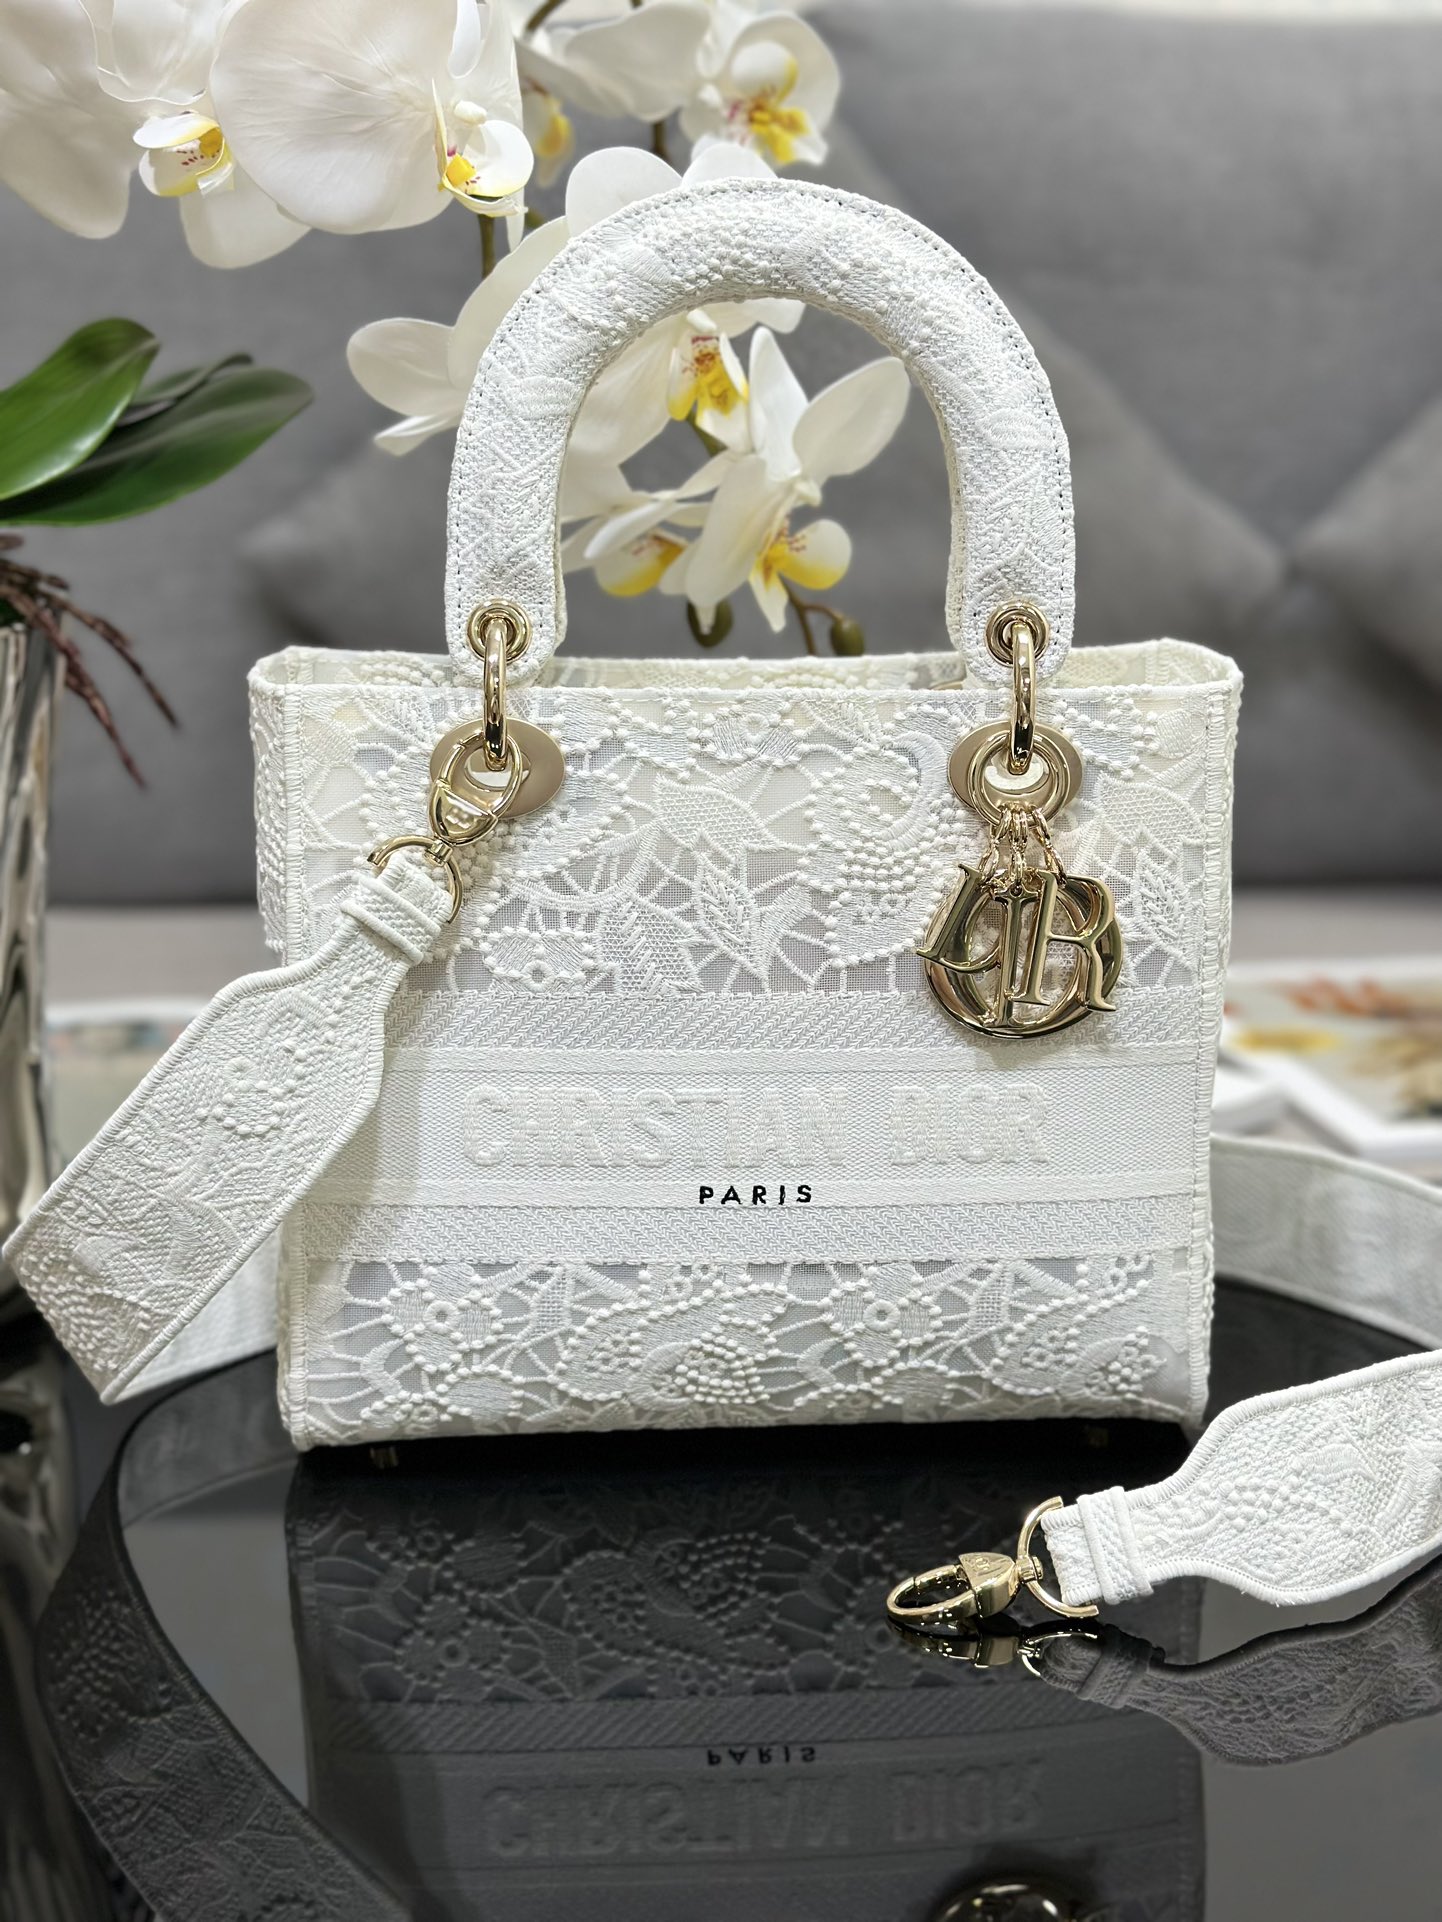 Dior Bags Handbags Gold White Embroidery Lace Lady